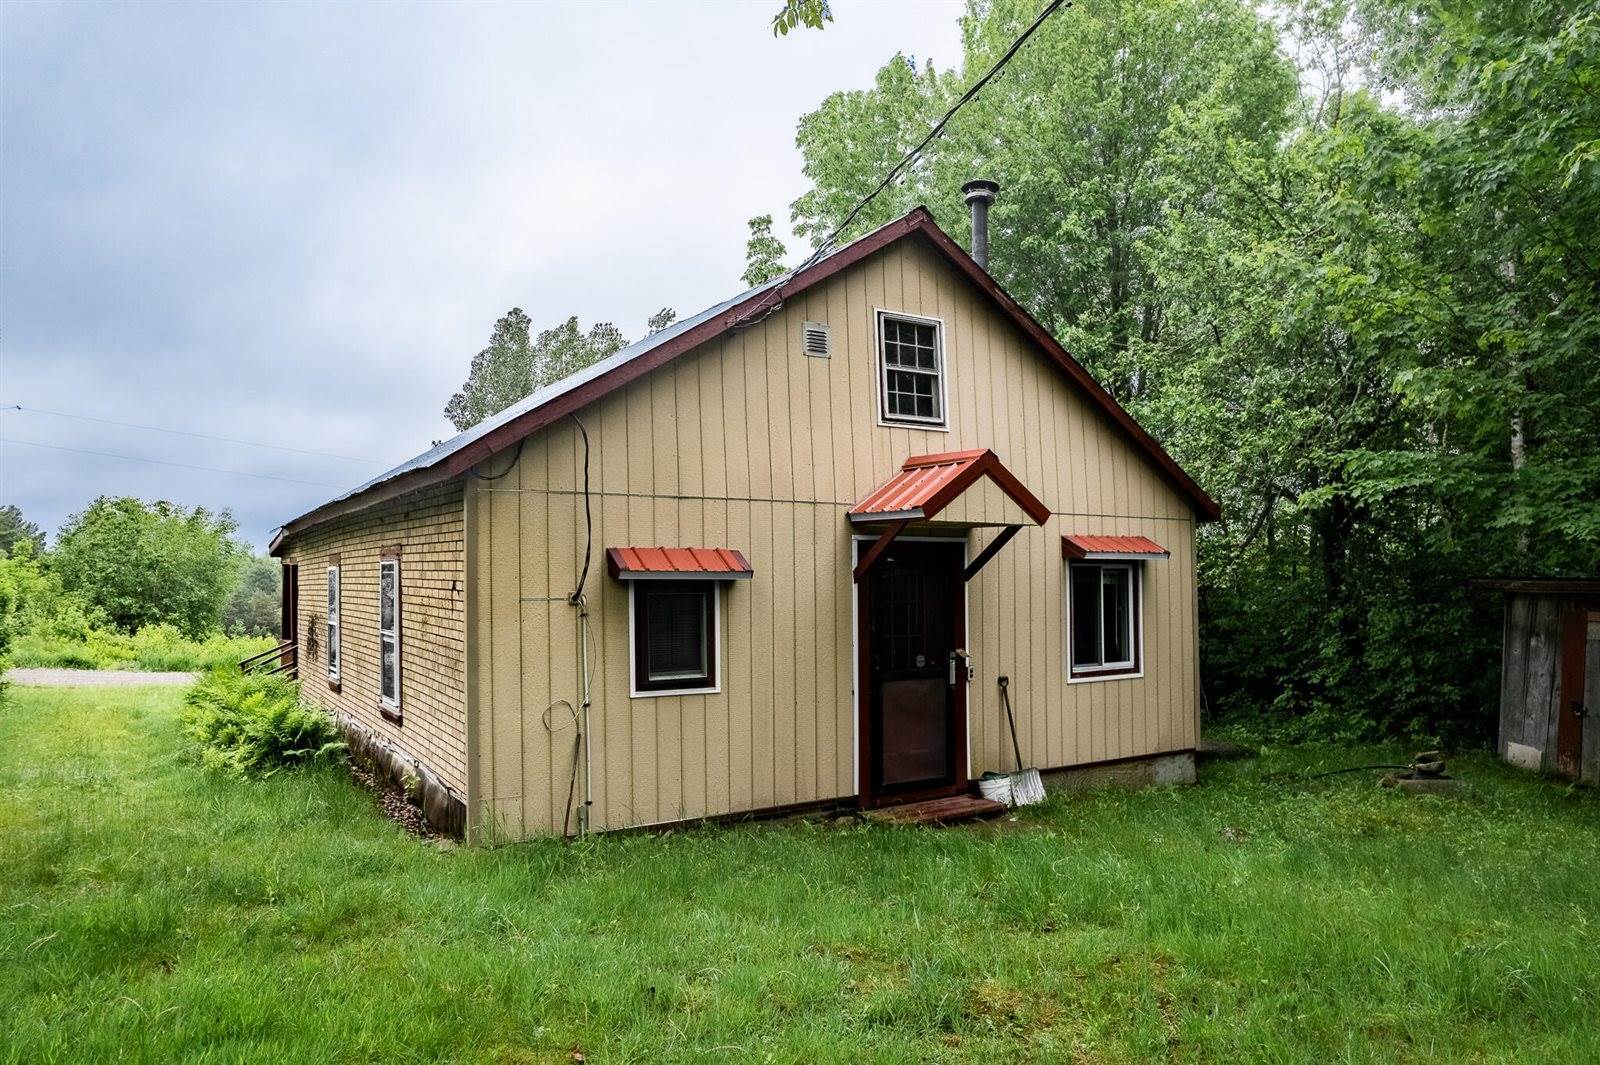 2434 Greenfield Road, Summit Township, ME 04418